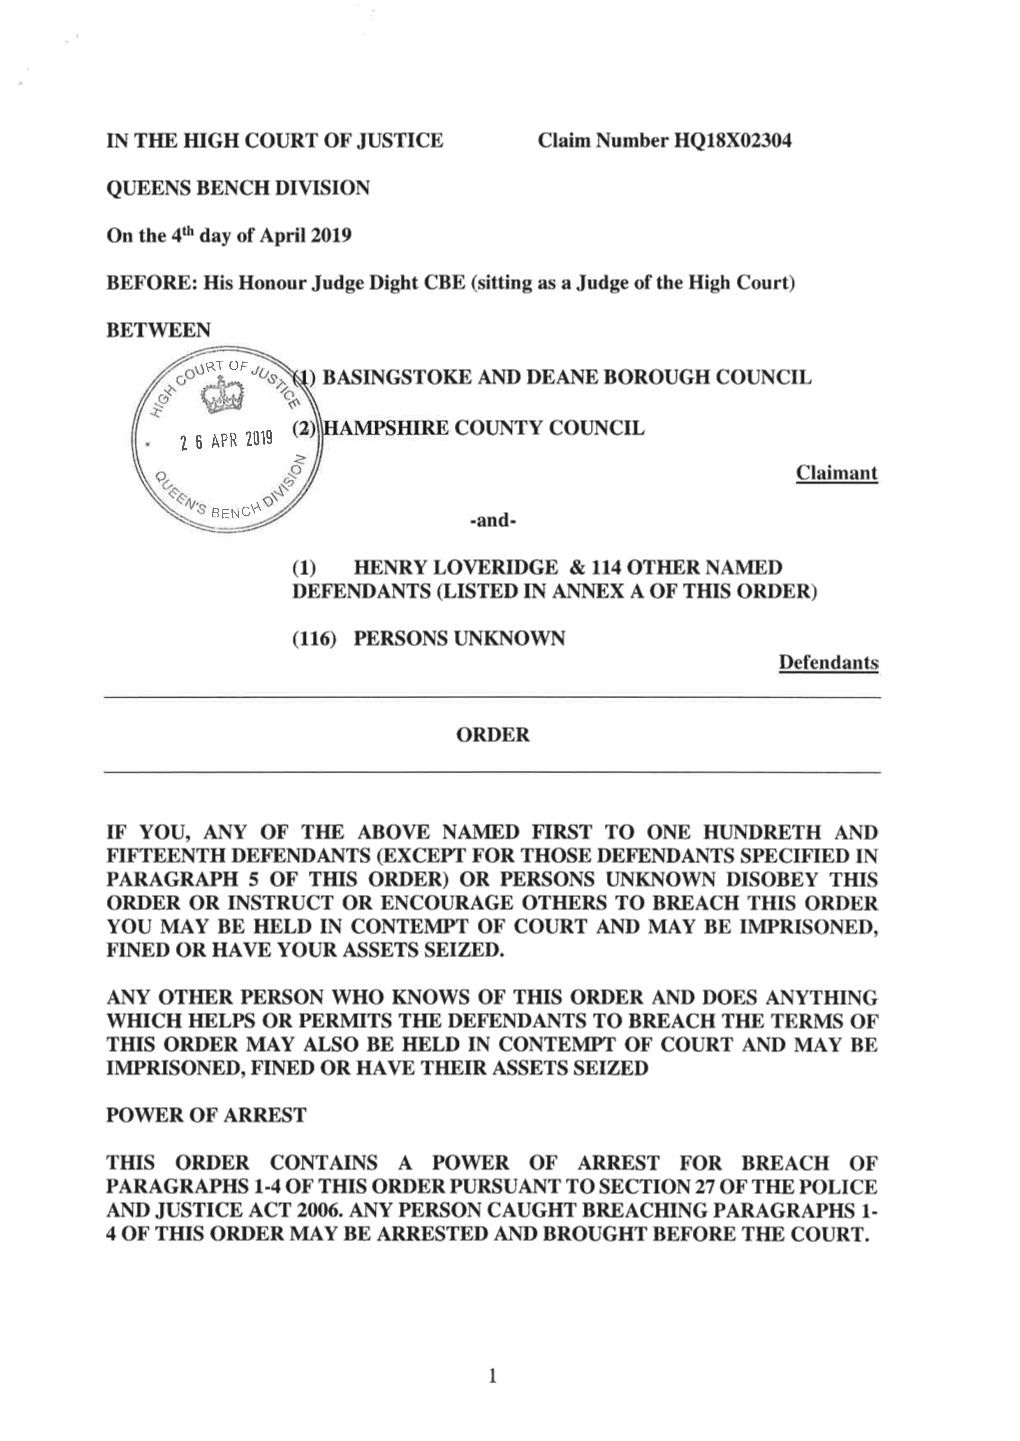 View Final Injunction Order Granted on 4 April 2019